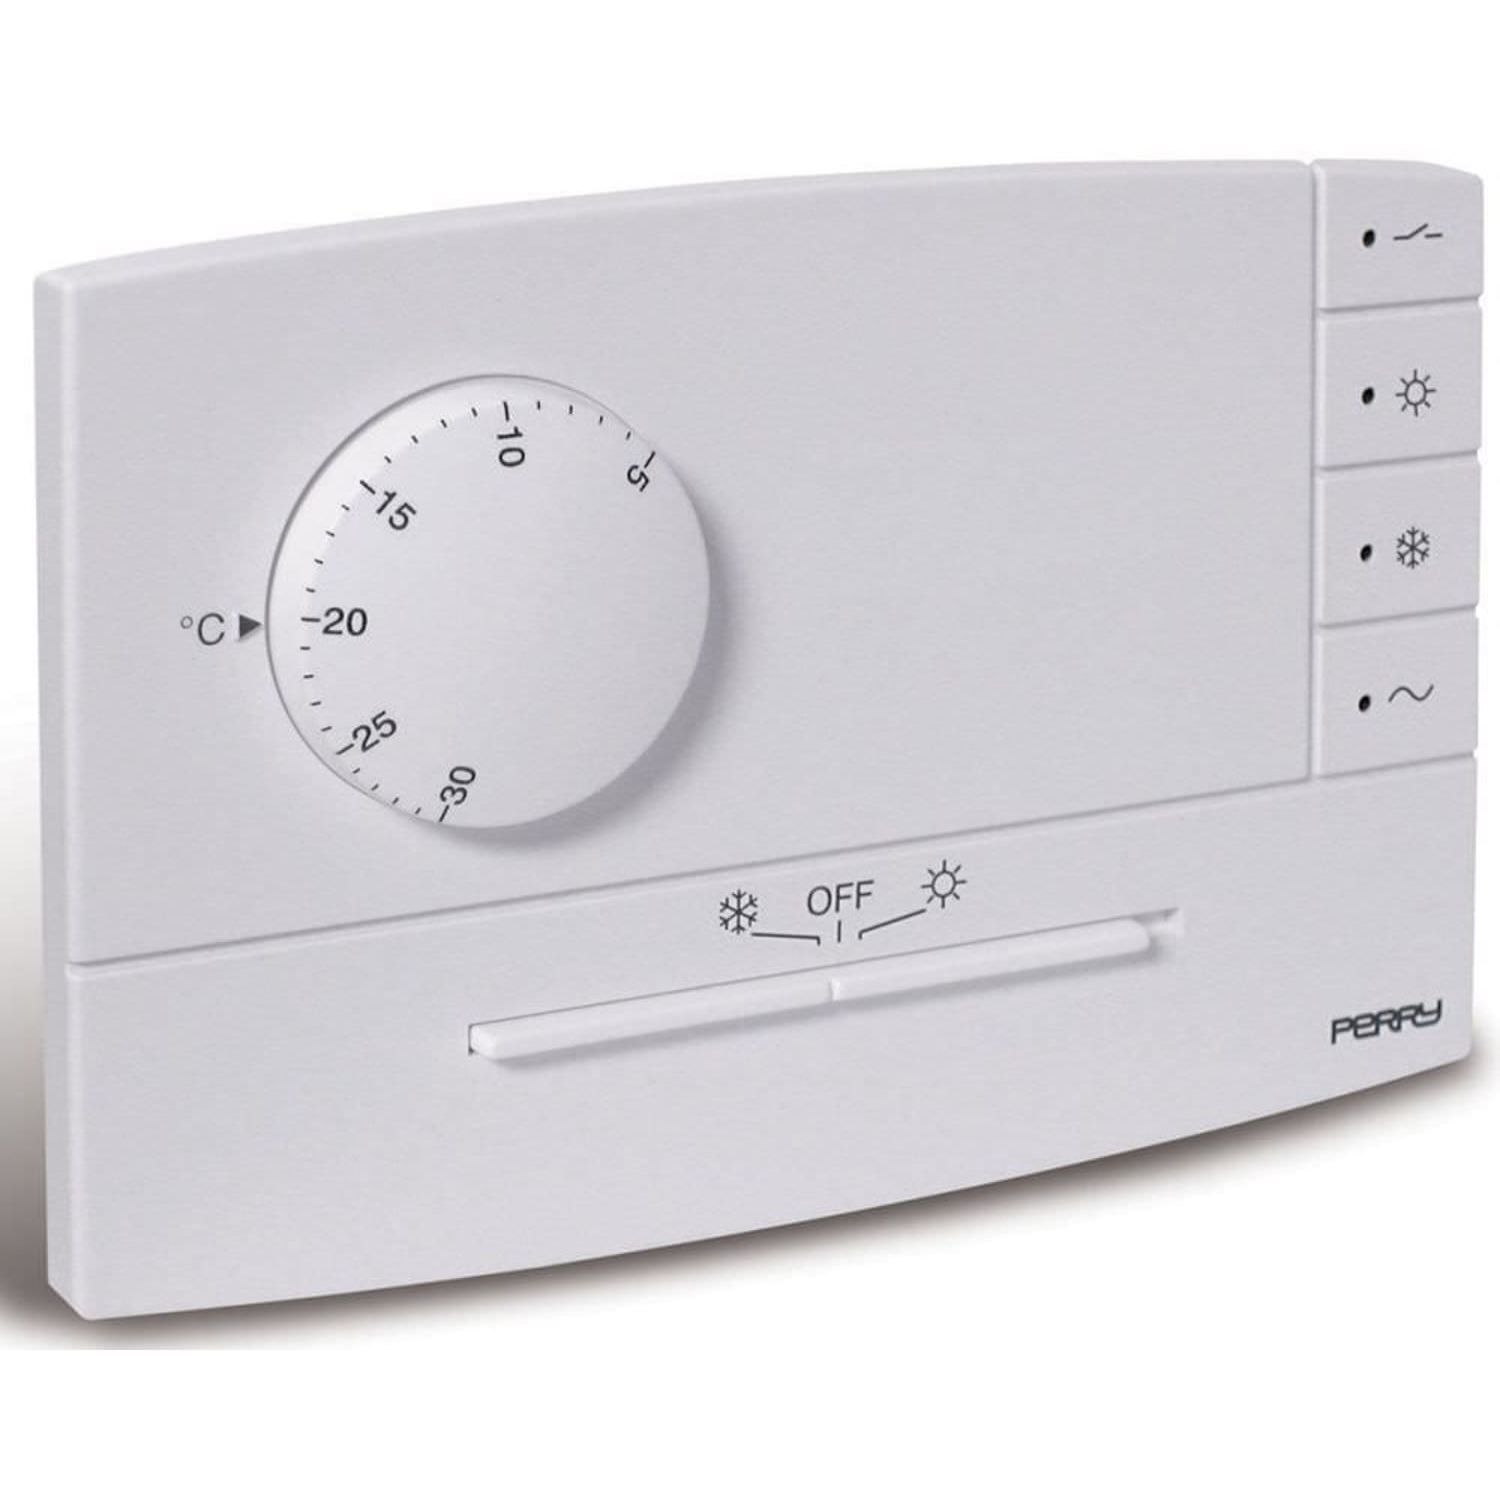 Perry heating thermostat